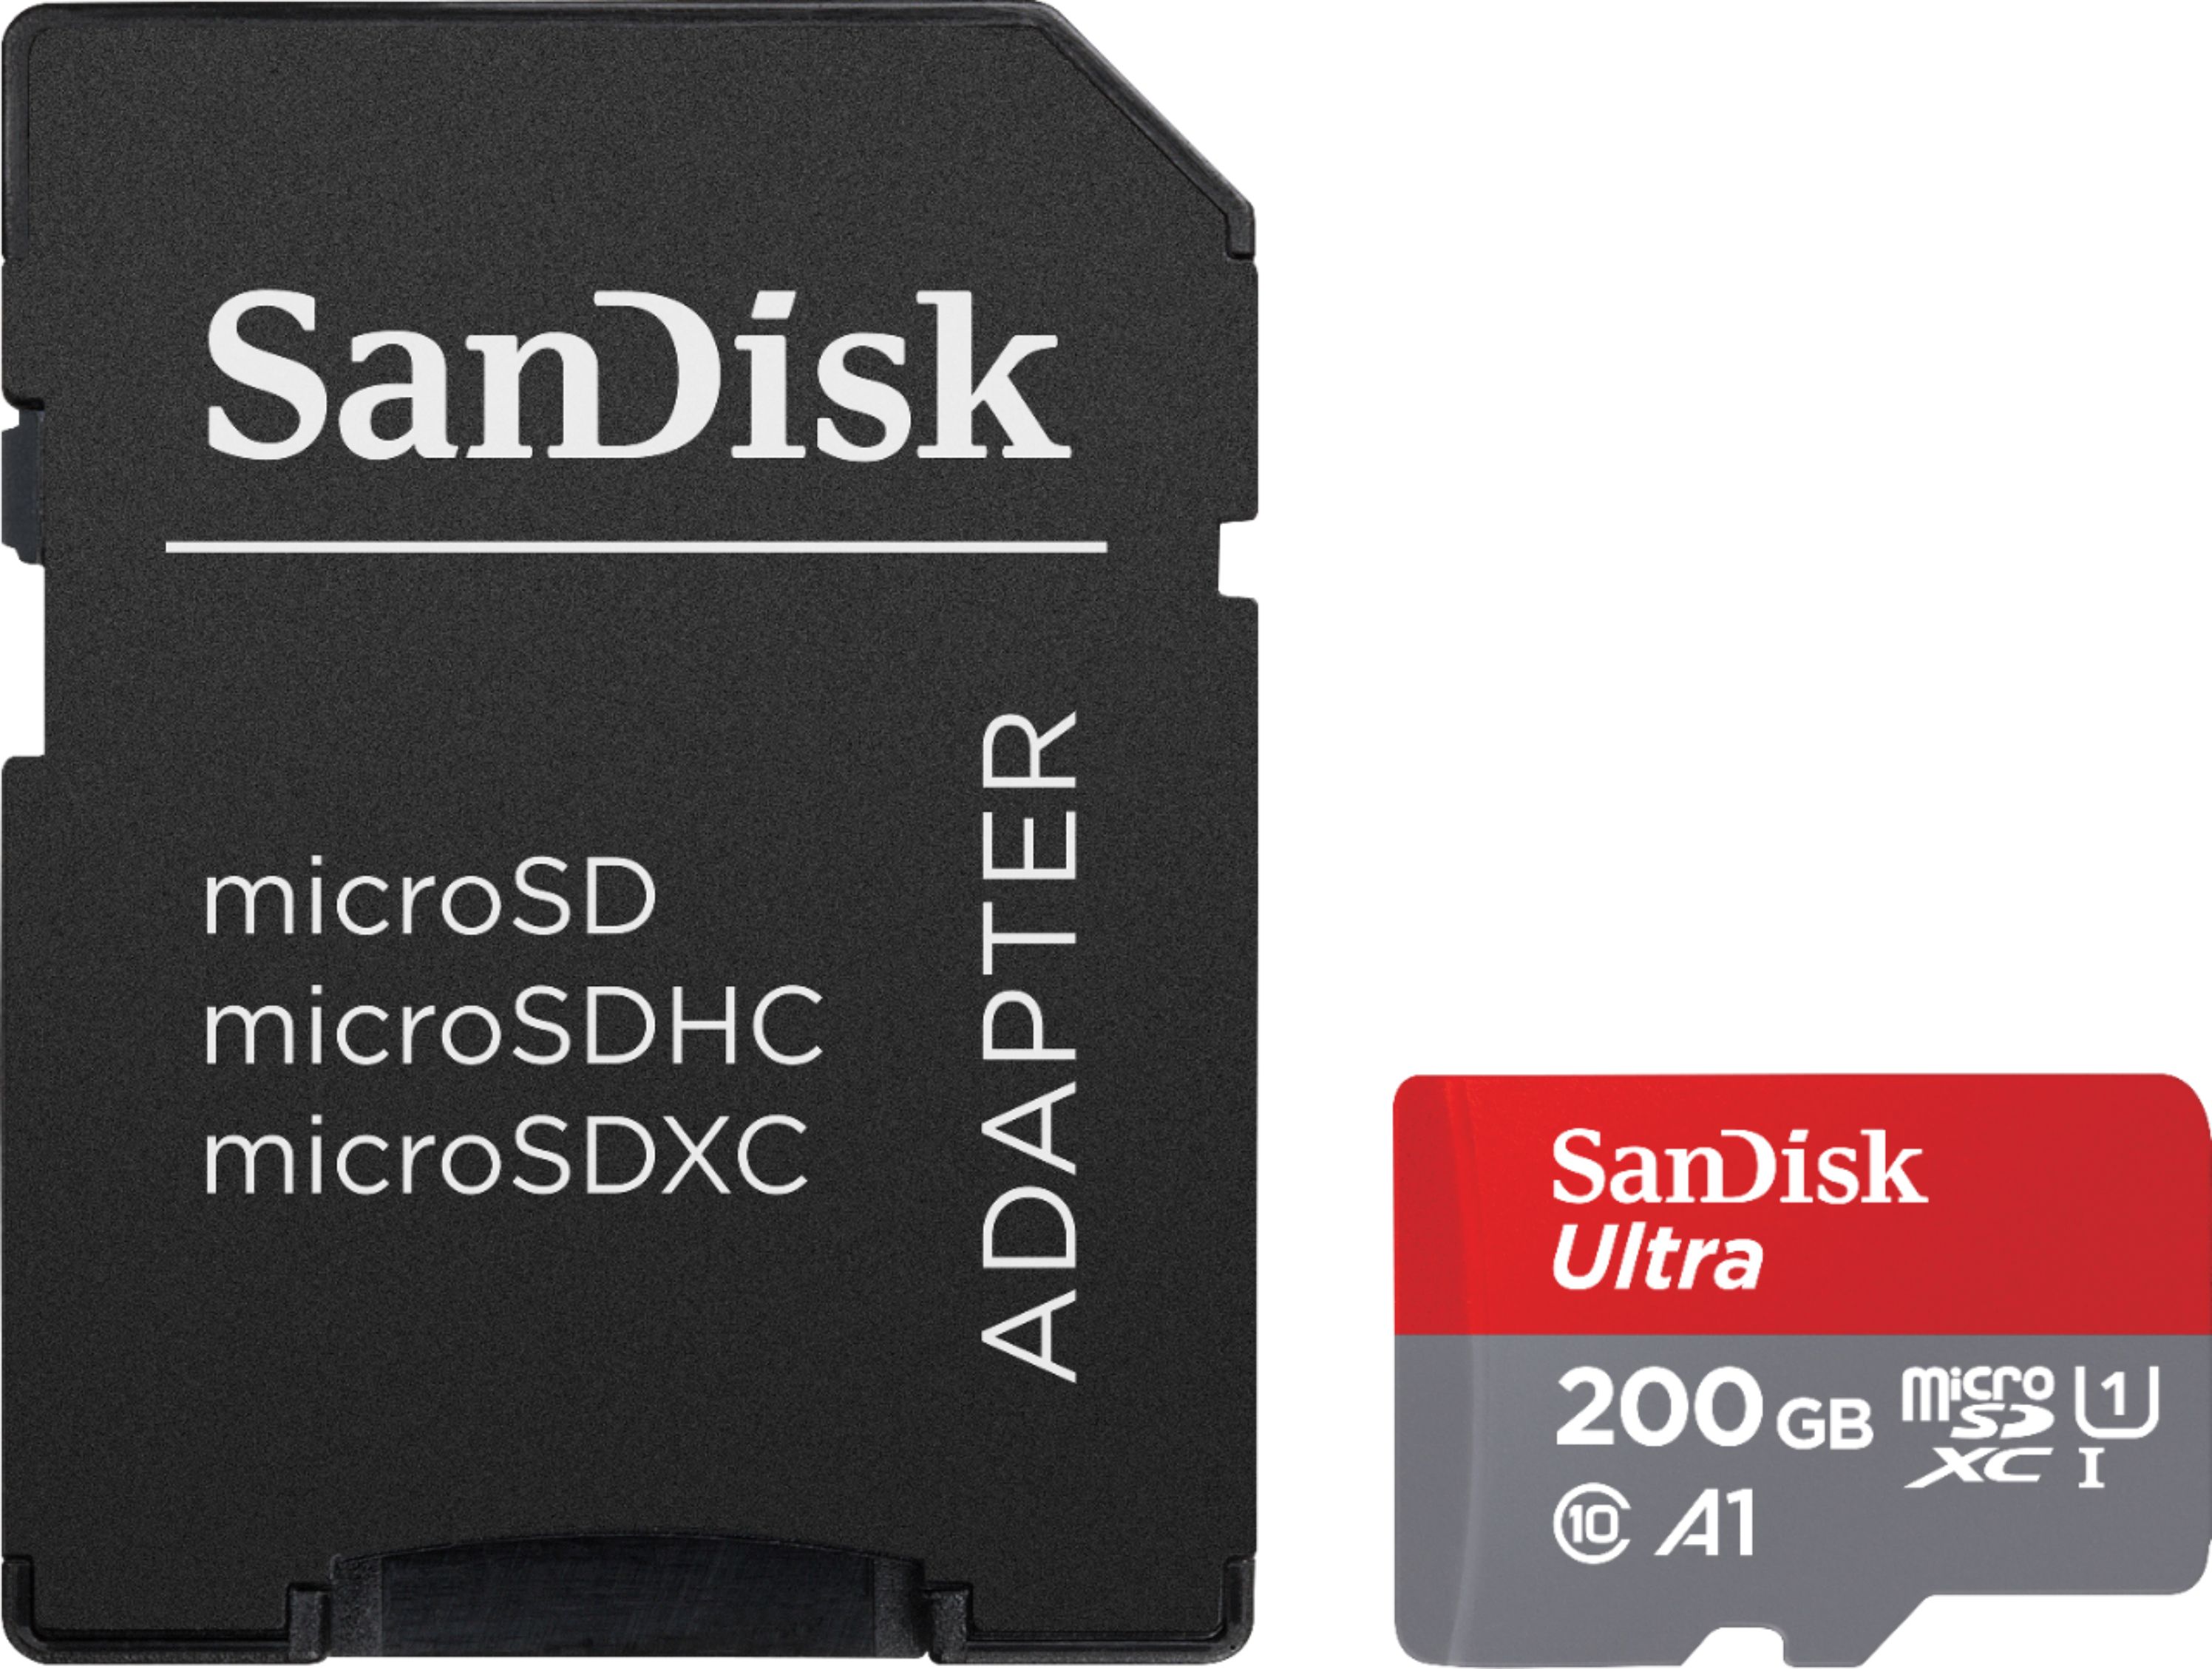 SanDisk Ultra 200GB MicroSDXC Verified for Micromax AQ5001 by SanFlash 100MBs A1 U1 C10 Works with SanDisk 